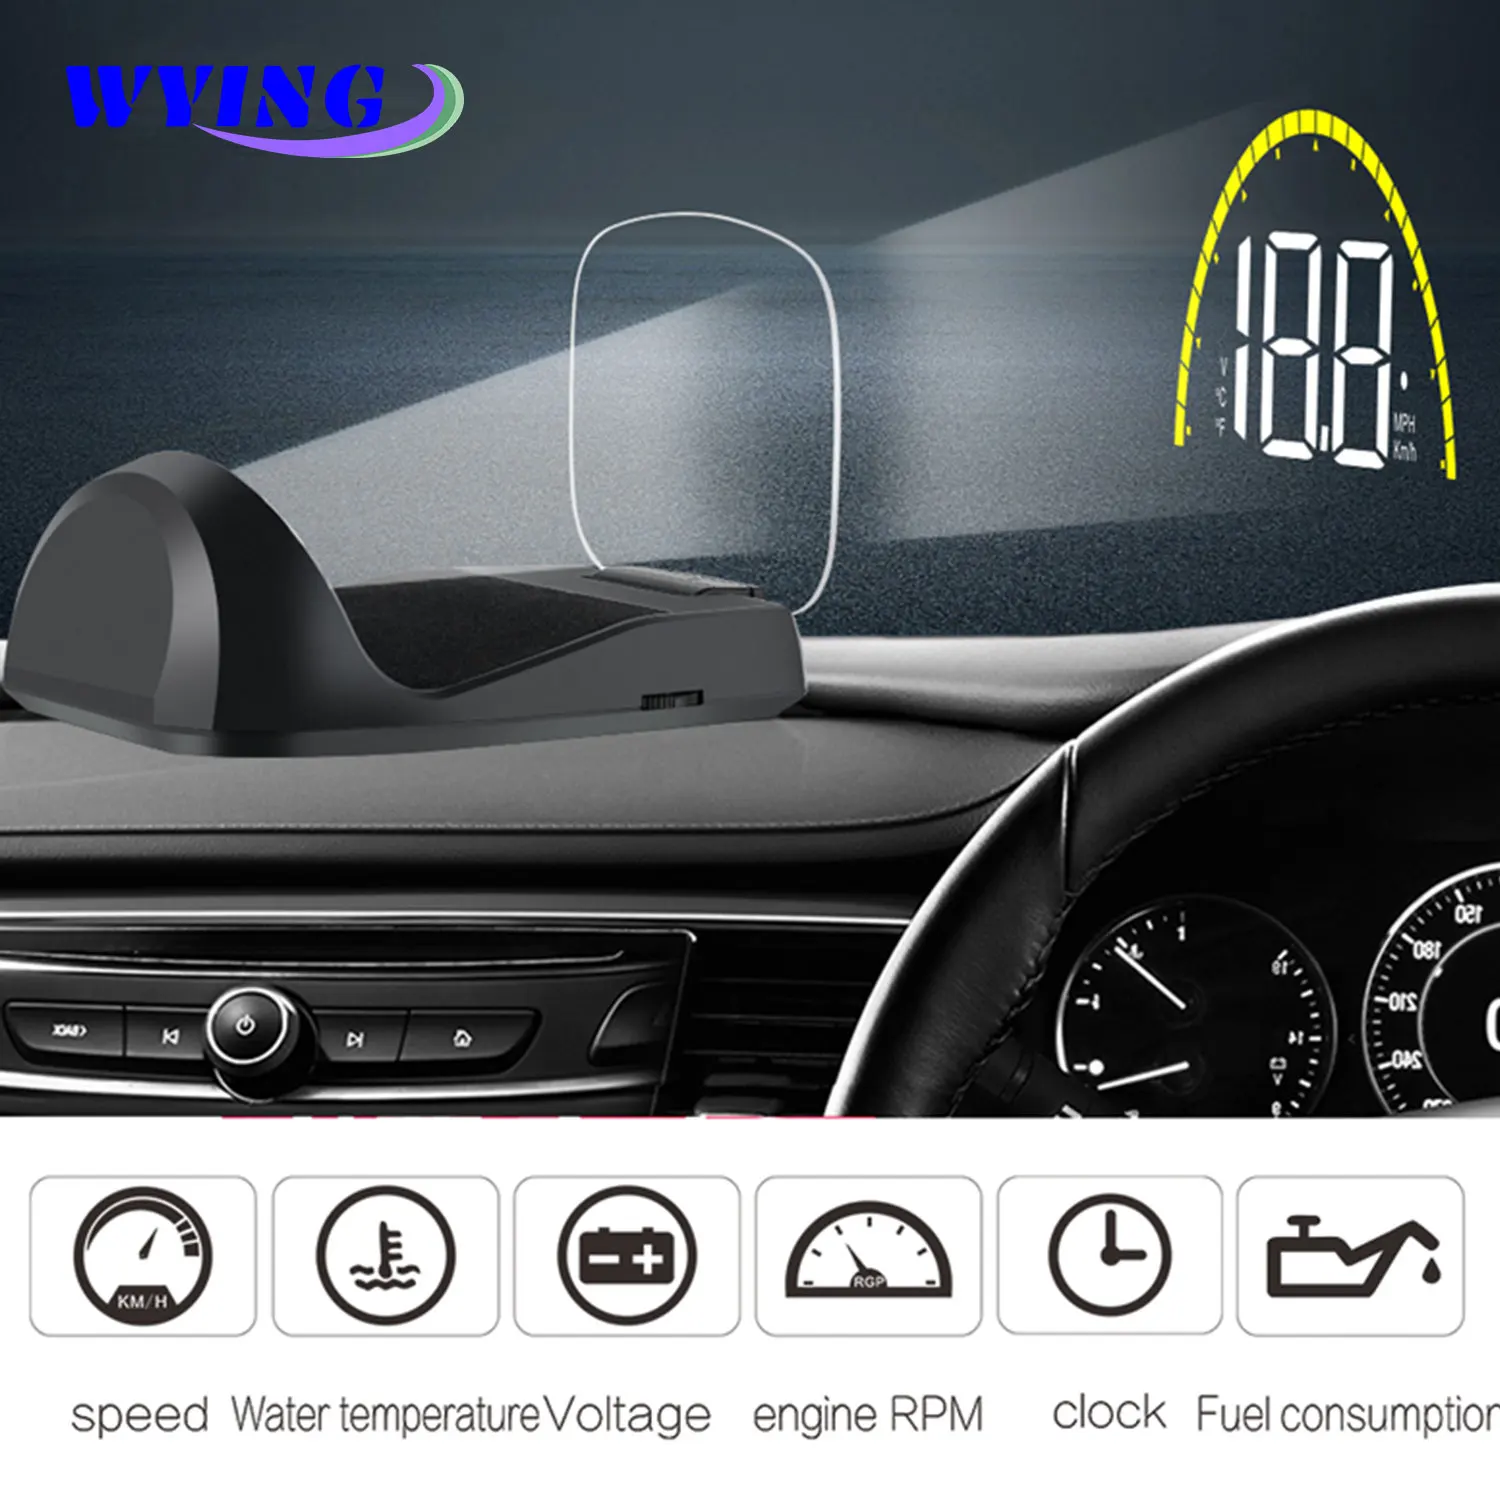 WYING Arrival C700 C700S OBD2 Car HUD OBD II HD Head-Up Speed Display Voltage Water Temperature Overspeed RPM Alarm For Car